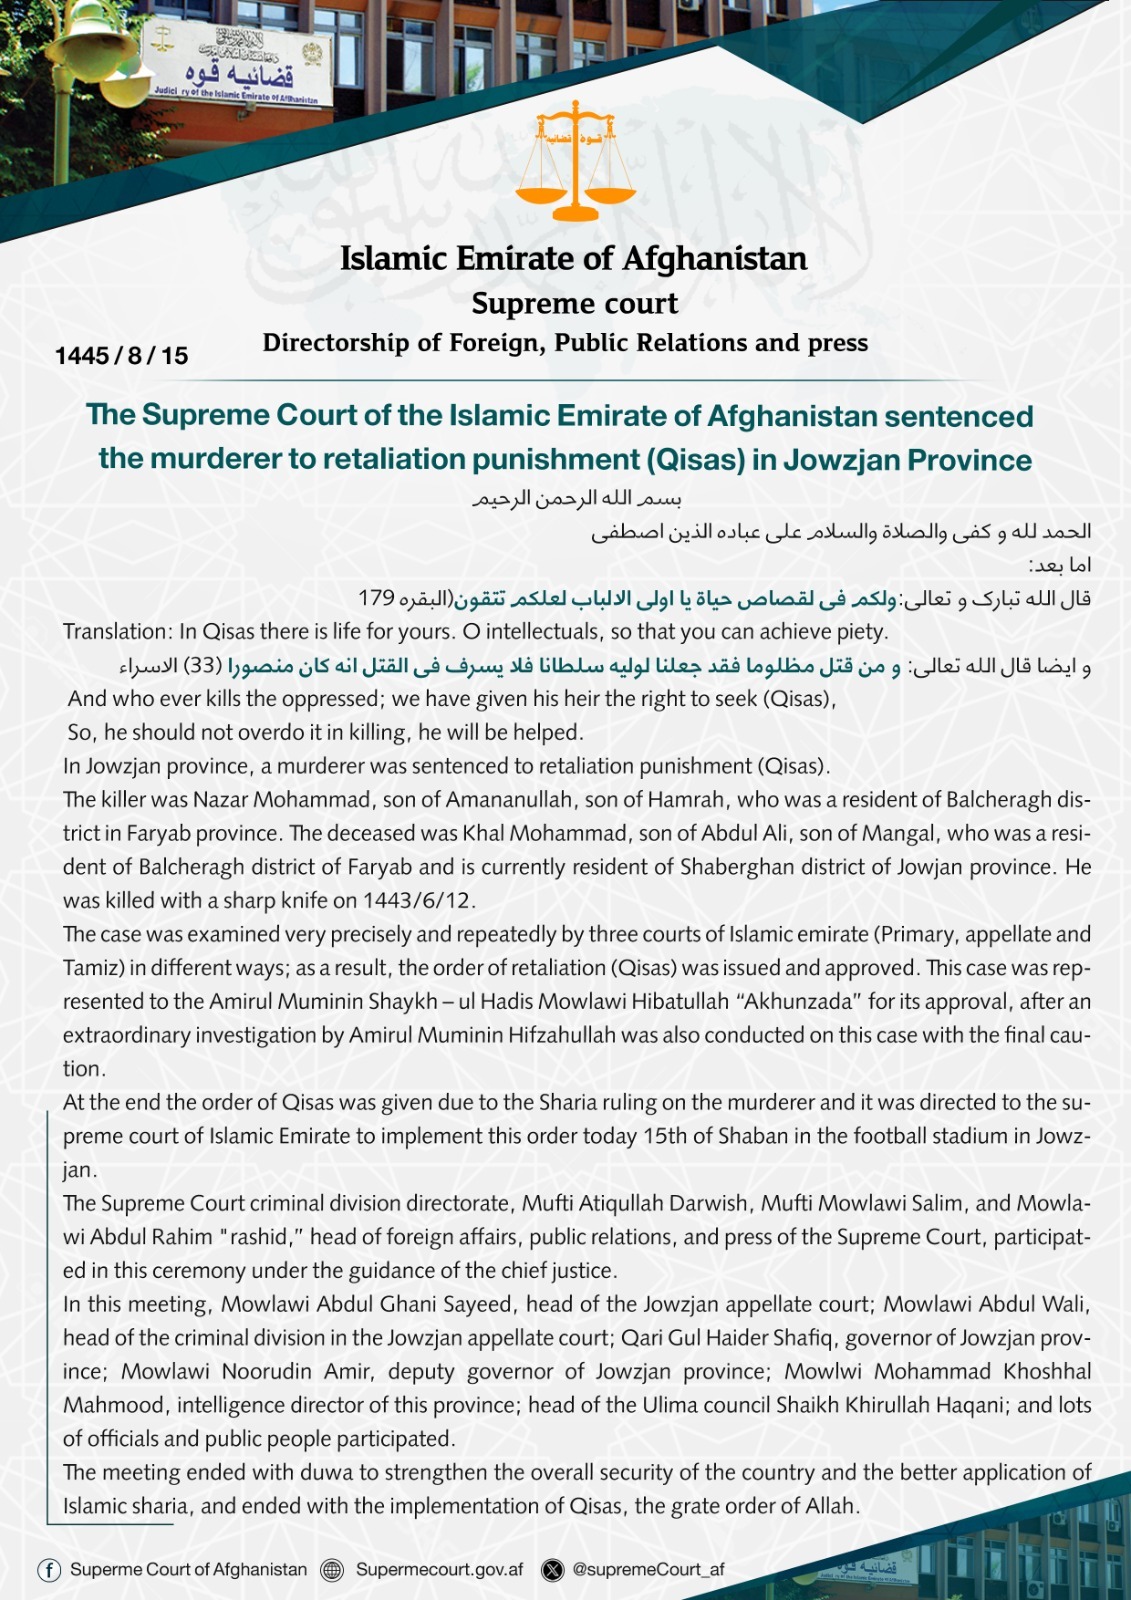 The Supreme Court of the Islamic Emirate of Afghanistan sentenced the murderer to retaliation punishment (Qisas) in Jowzjan Province